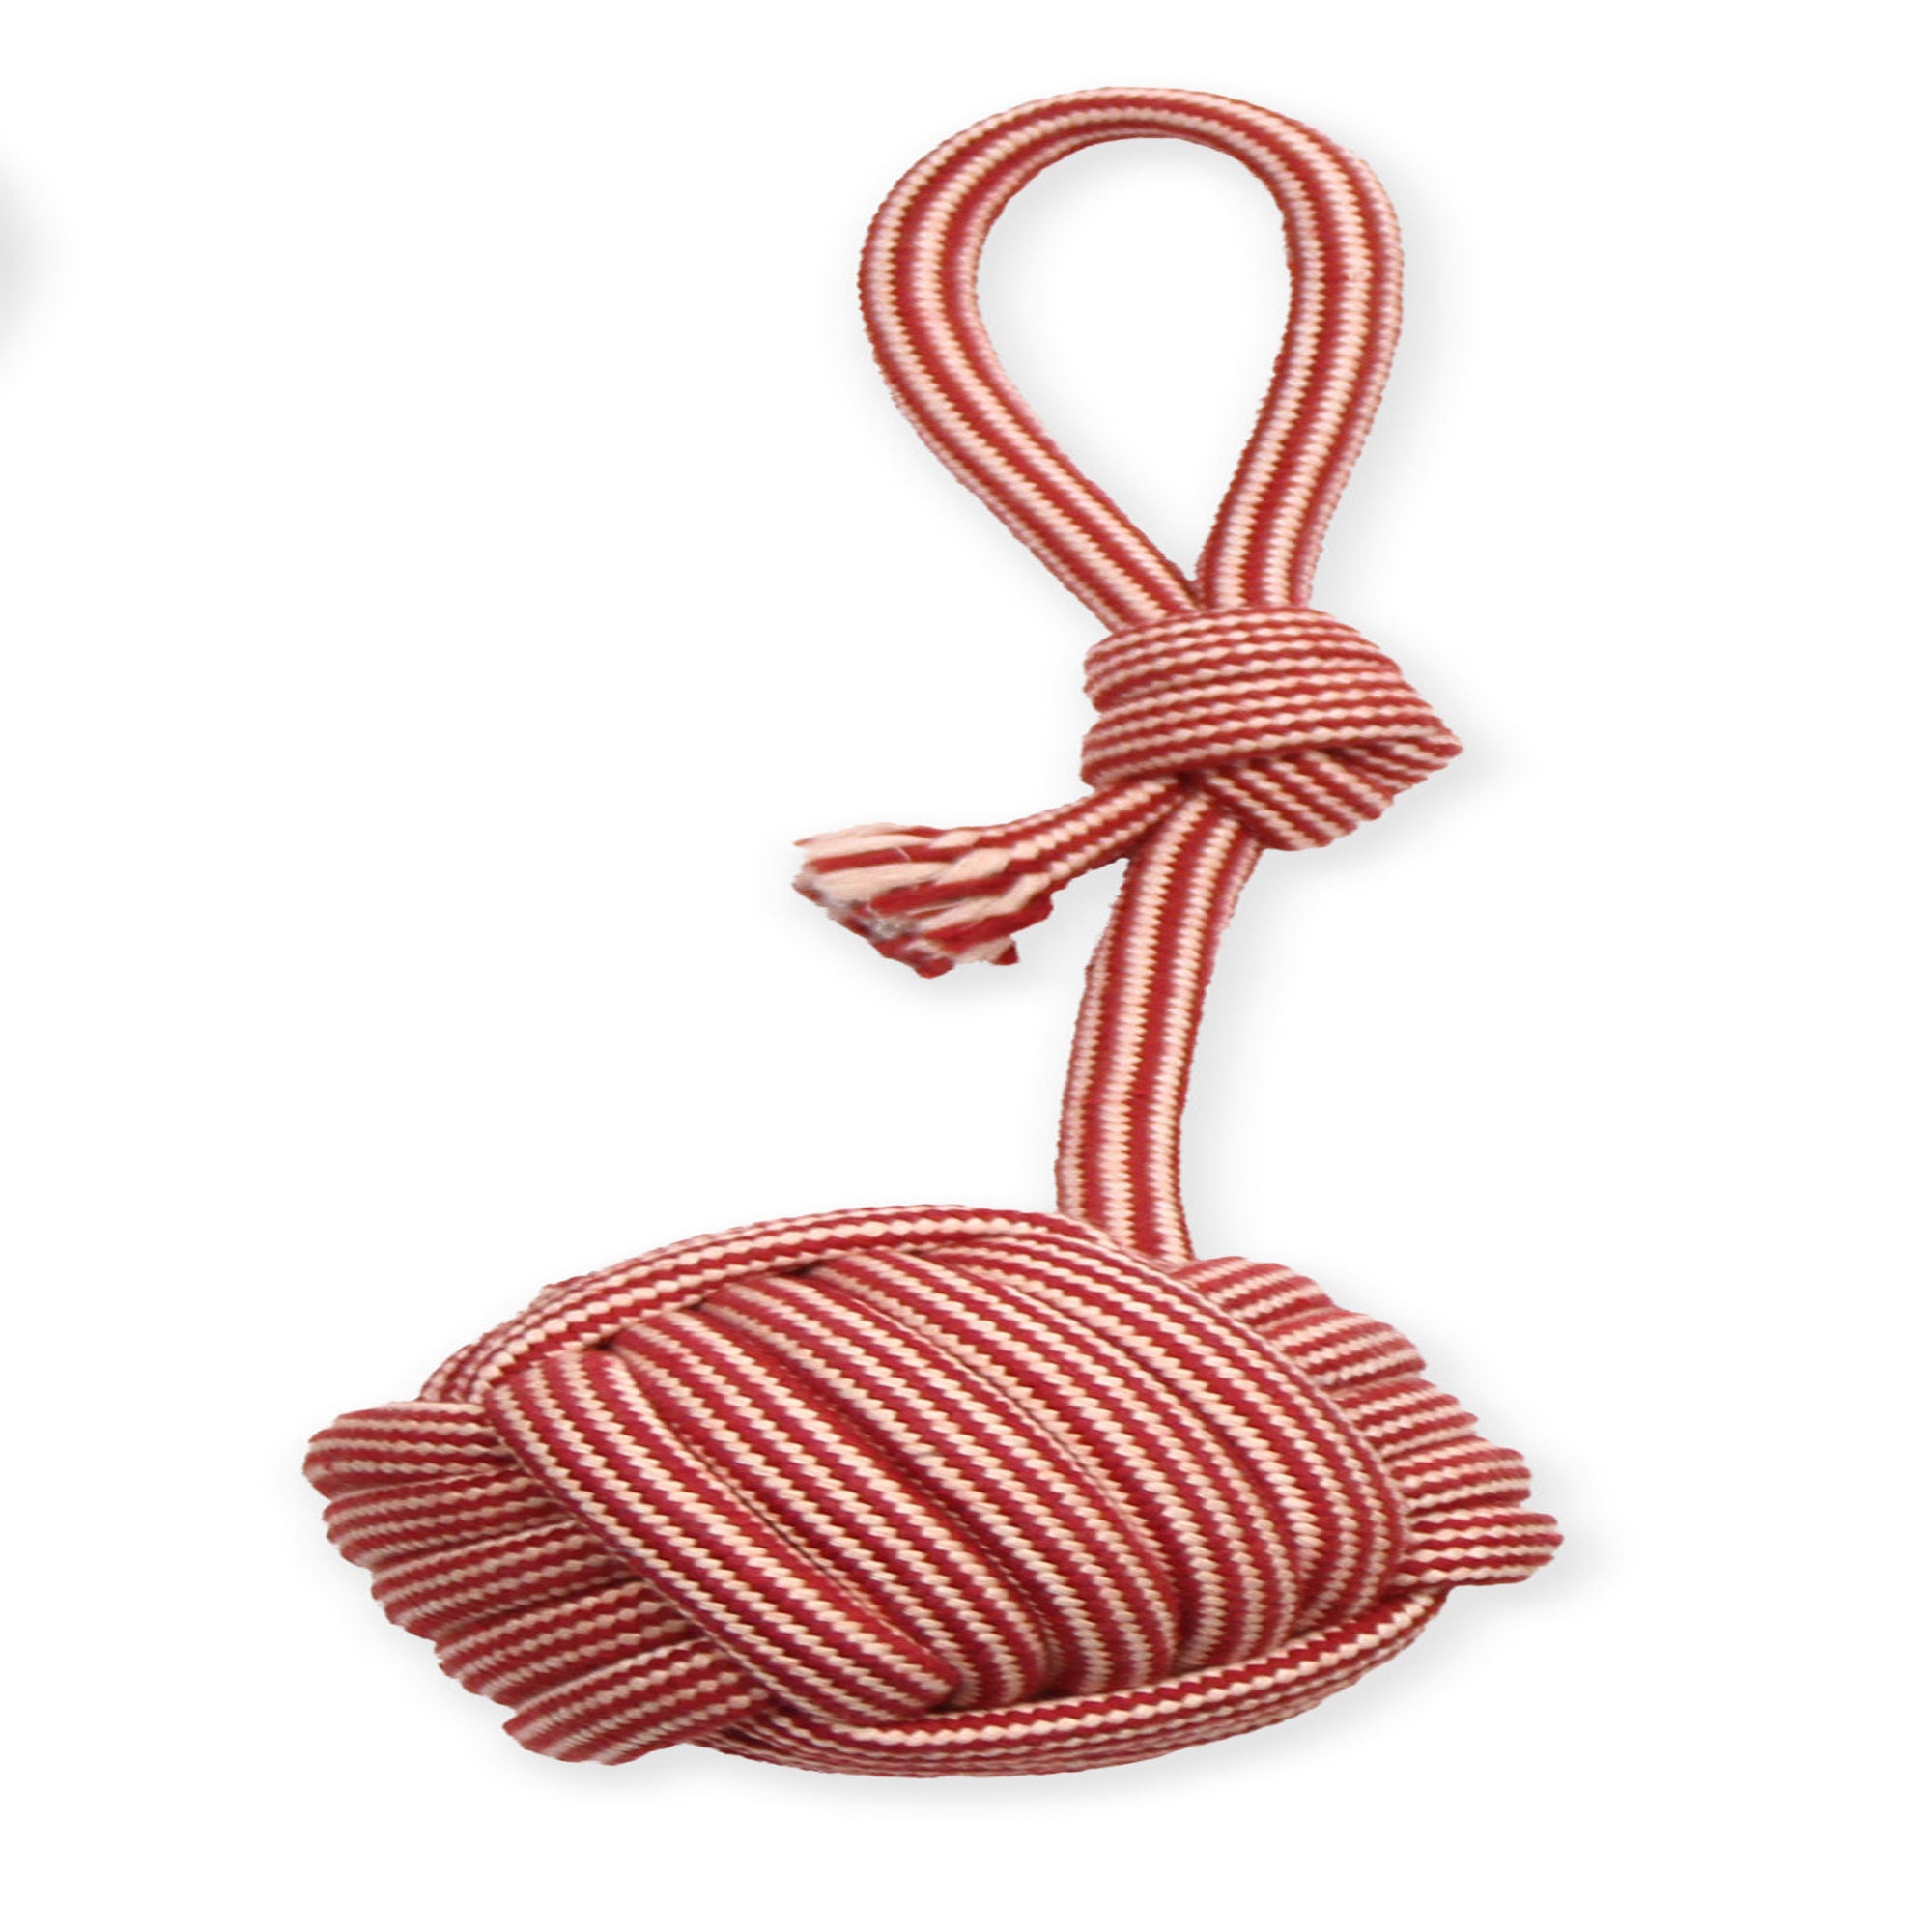 Mammoth Pet Products EXTRA Flossy Chew Monkey Fist Tug w-Loop Handle Dog Toy Red-White; 1ea-MD; 14 in